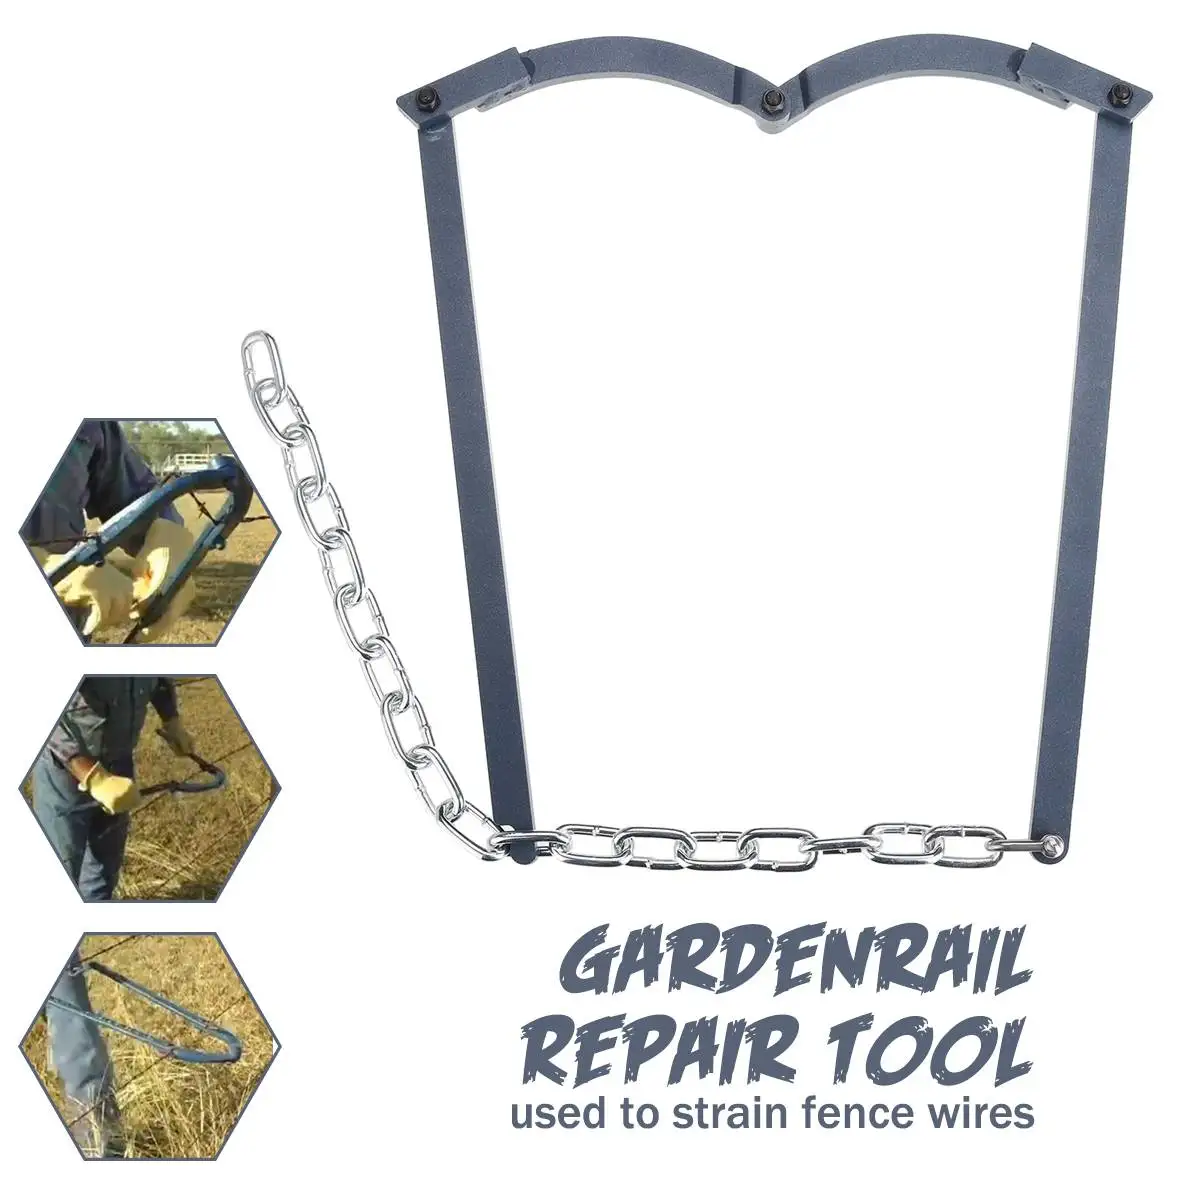 guardrail-repair-fence-repair-tool-barbed-wire-fence-fixer-repair-tool-portable-garden-home-outdoor-fixing-guardrail-hand-tools